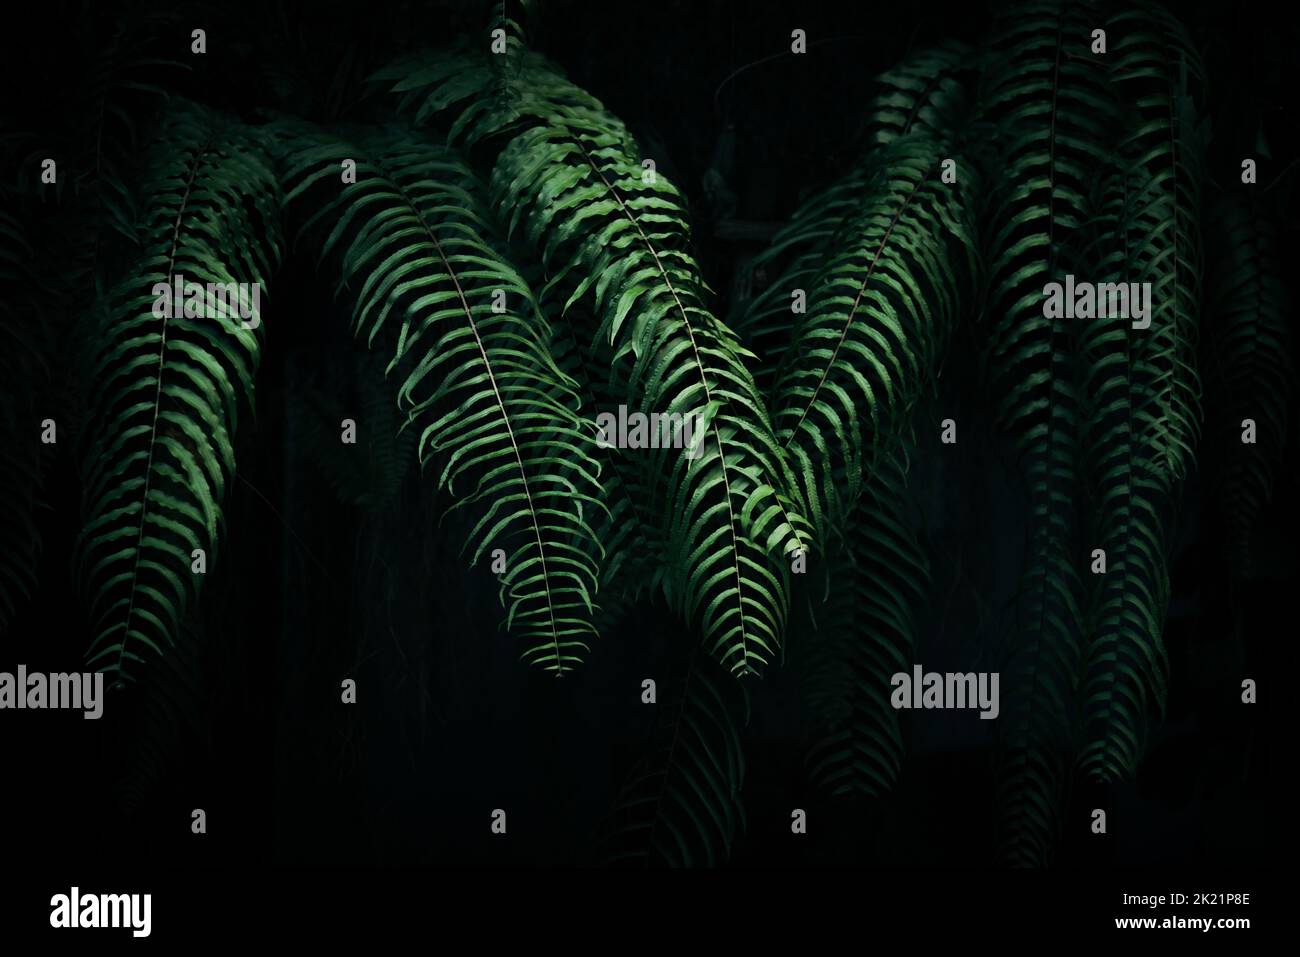 Fern leaves with dark background Stock Photo